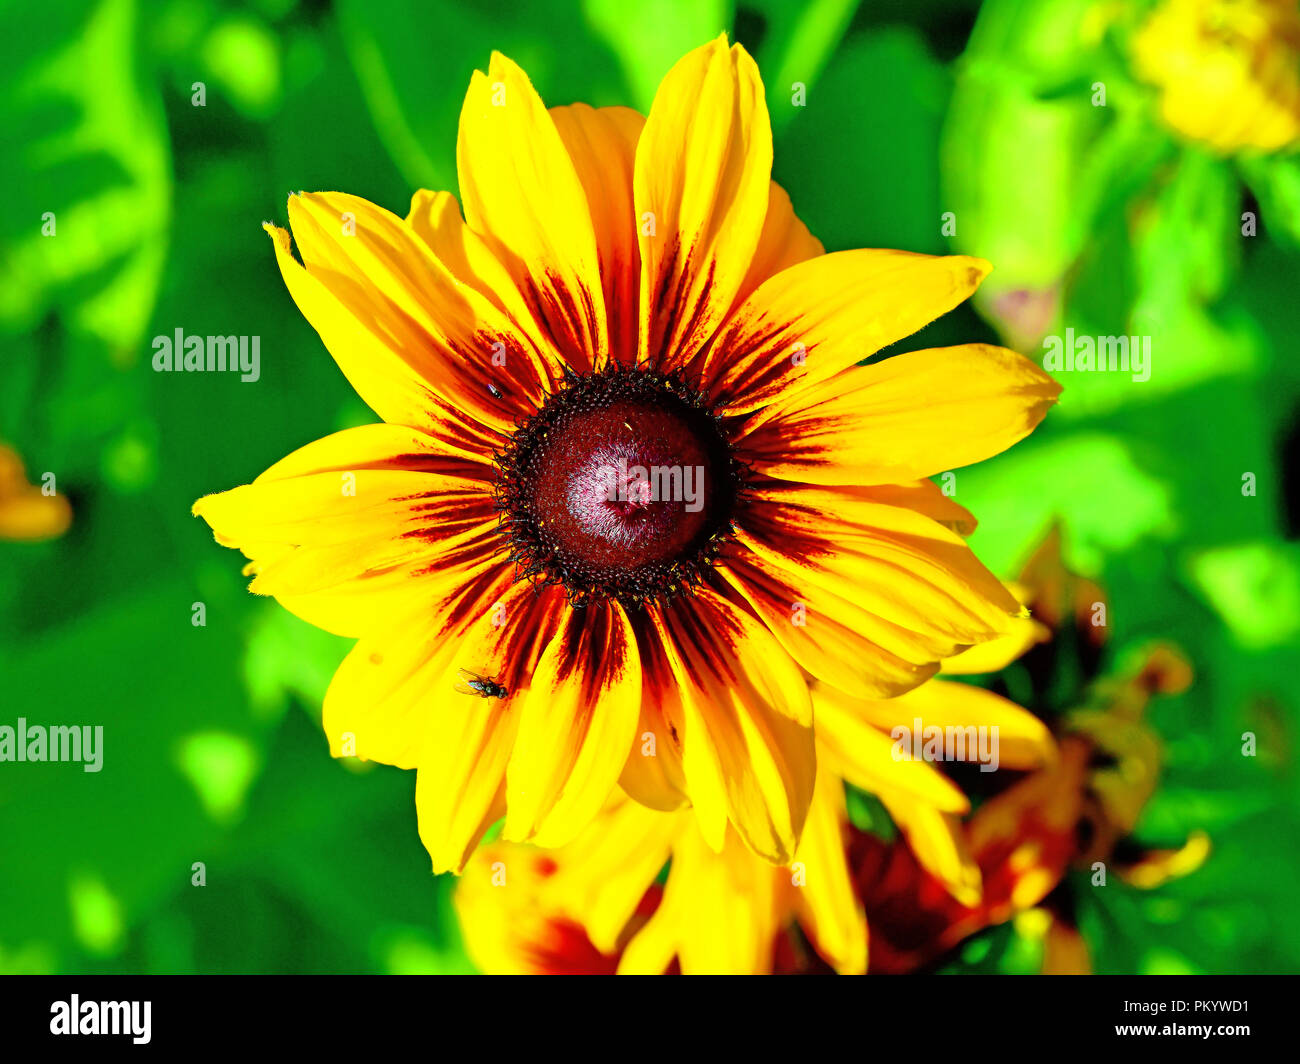 Golden yellow sunflower type with fly Stock Photo